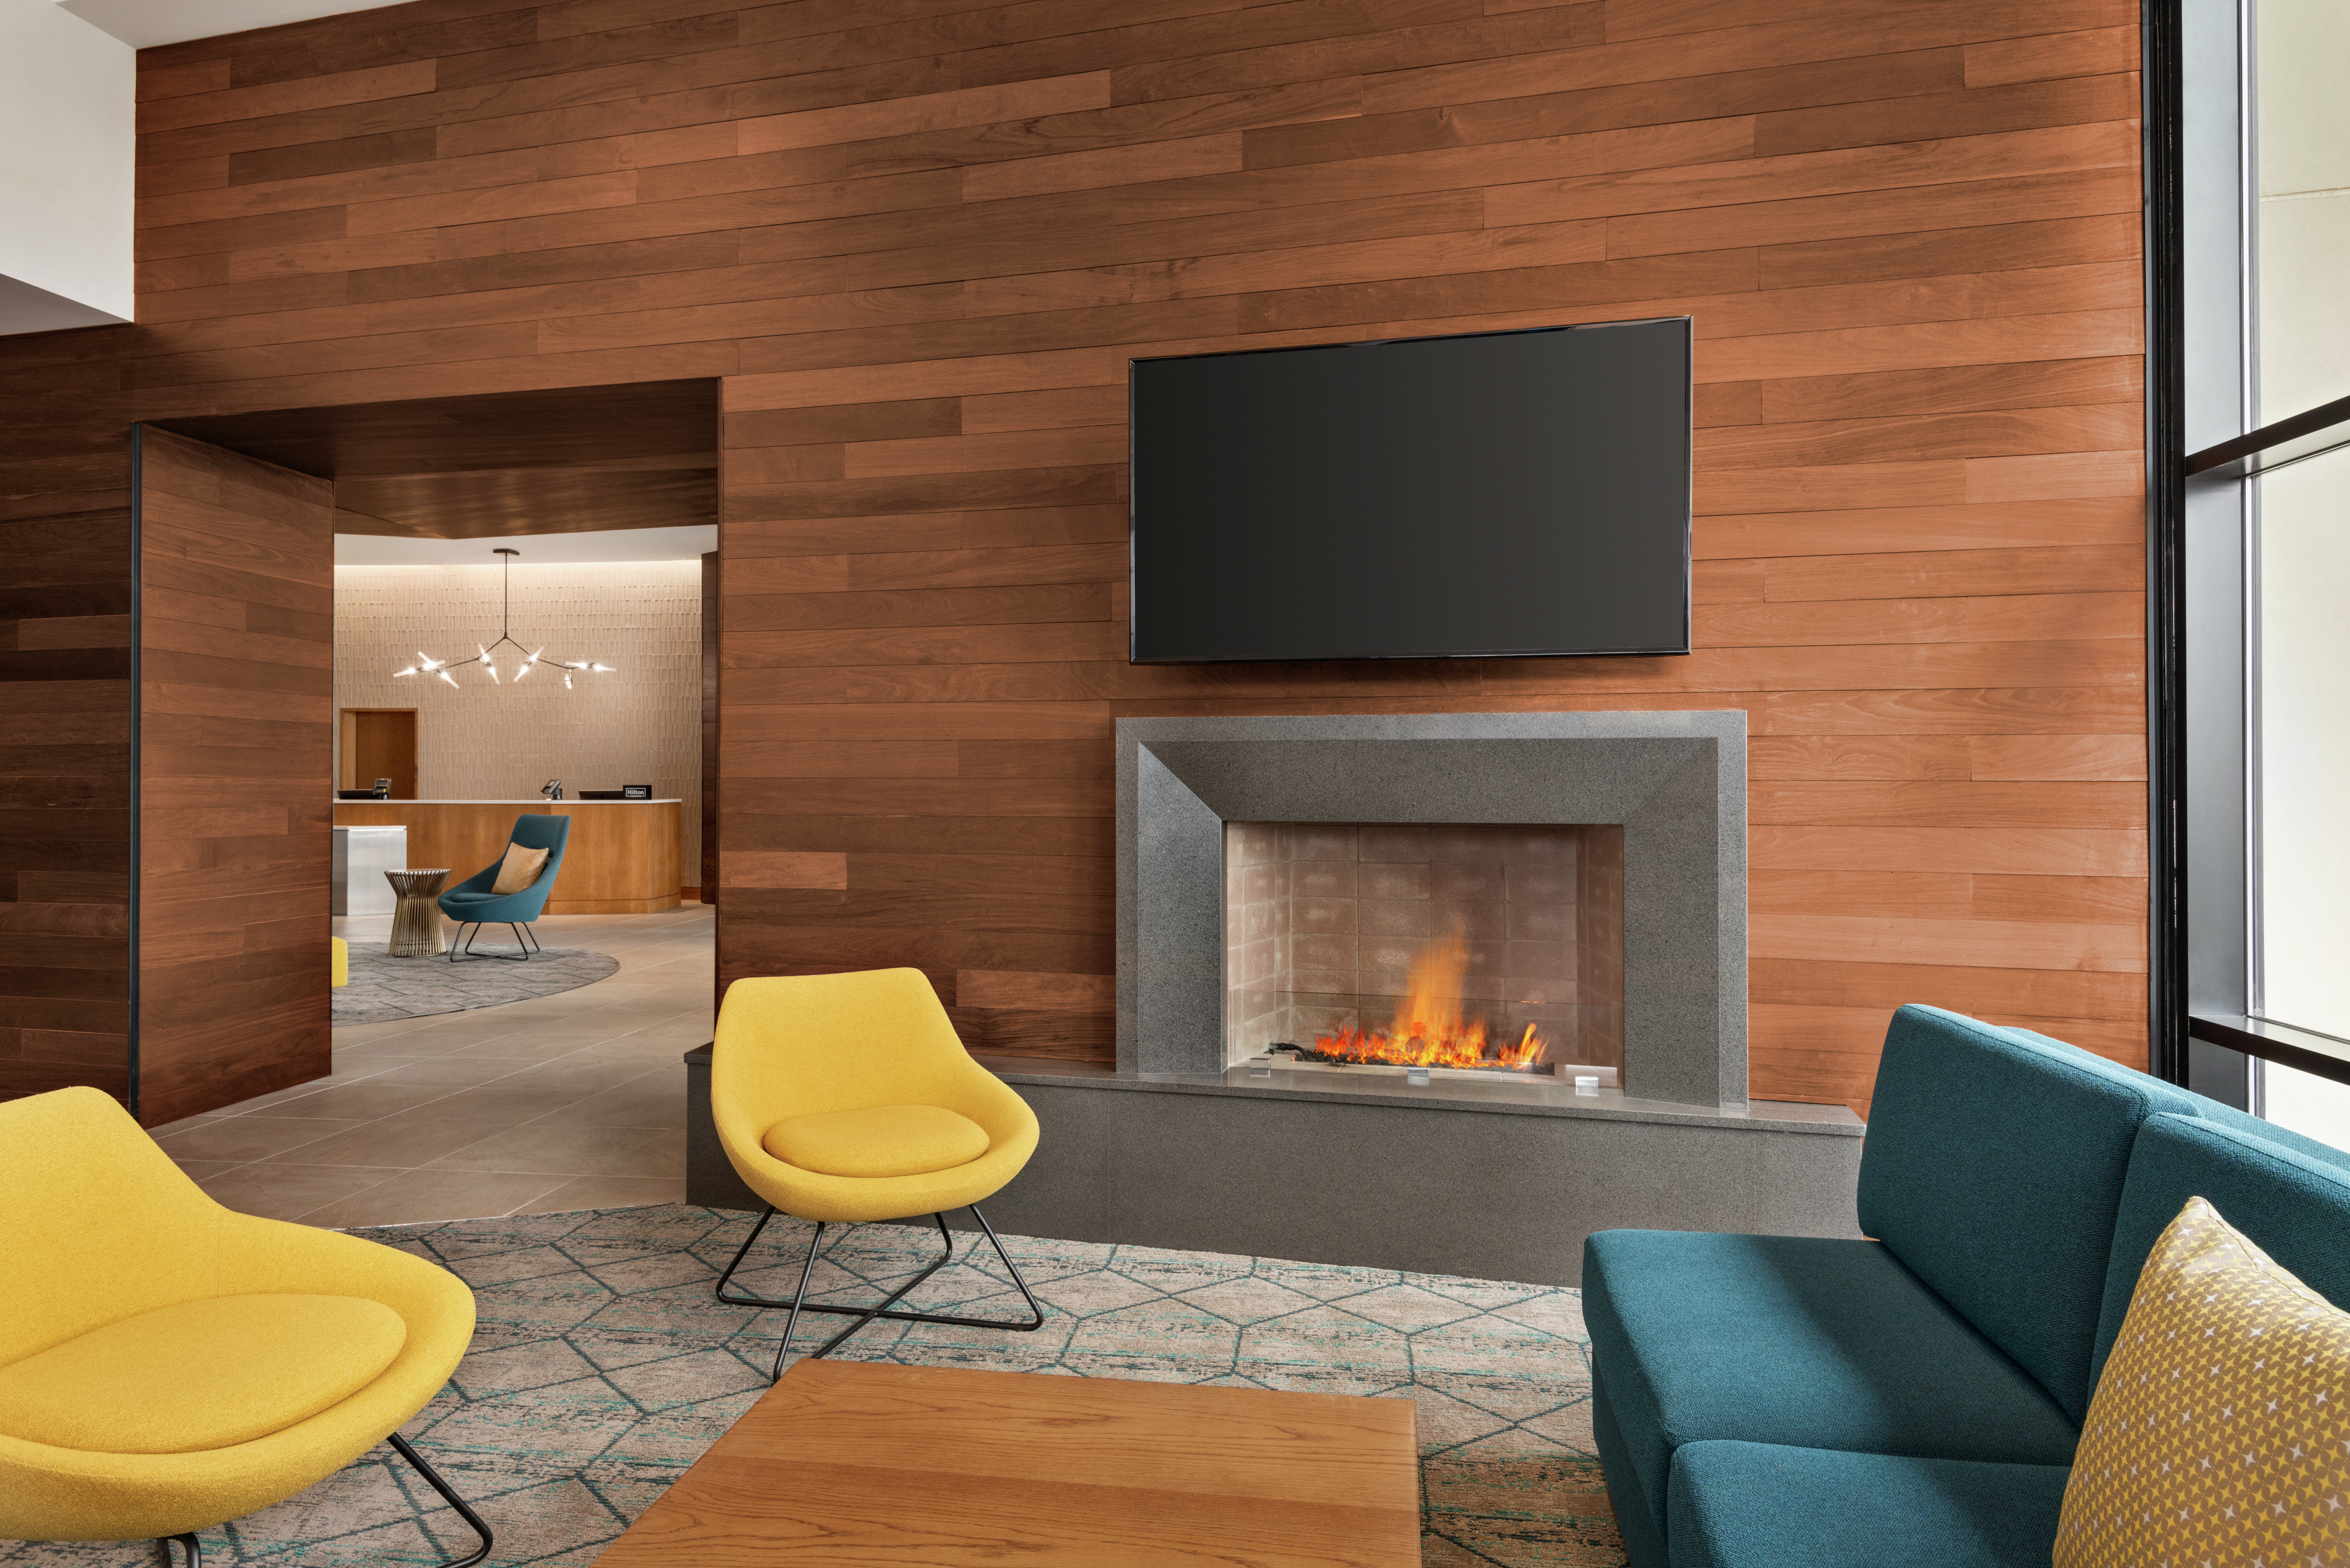 Bright lobby lounge area with stylish furniture, floor to ceiling windows, wood paneled walls, fireplace, and TV.